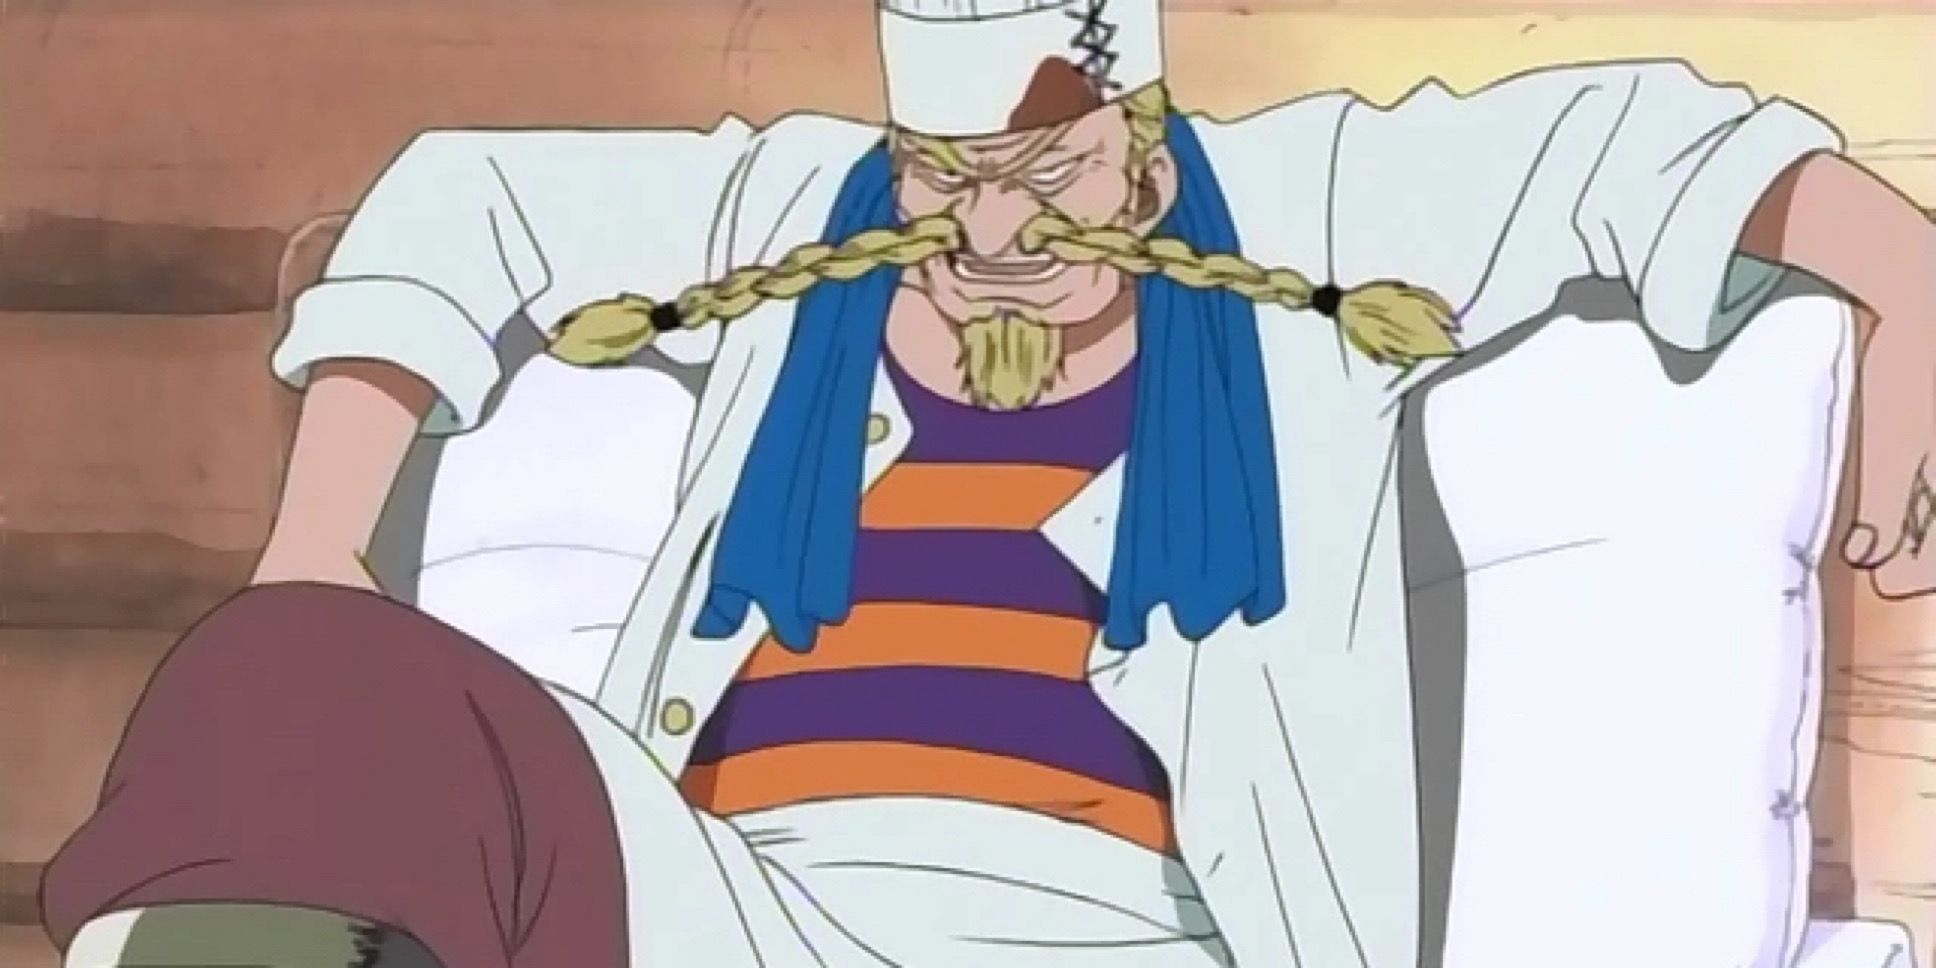 Zeff From One Piece In His Chef Uniform And Peg Leg